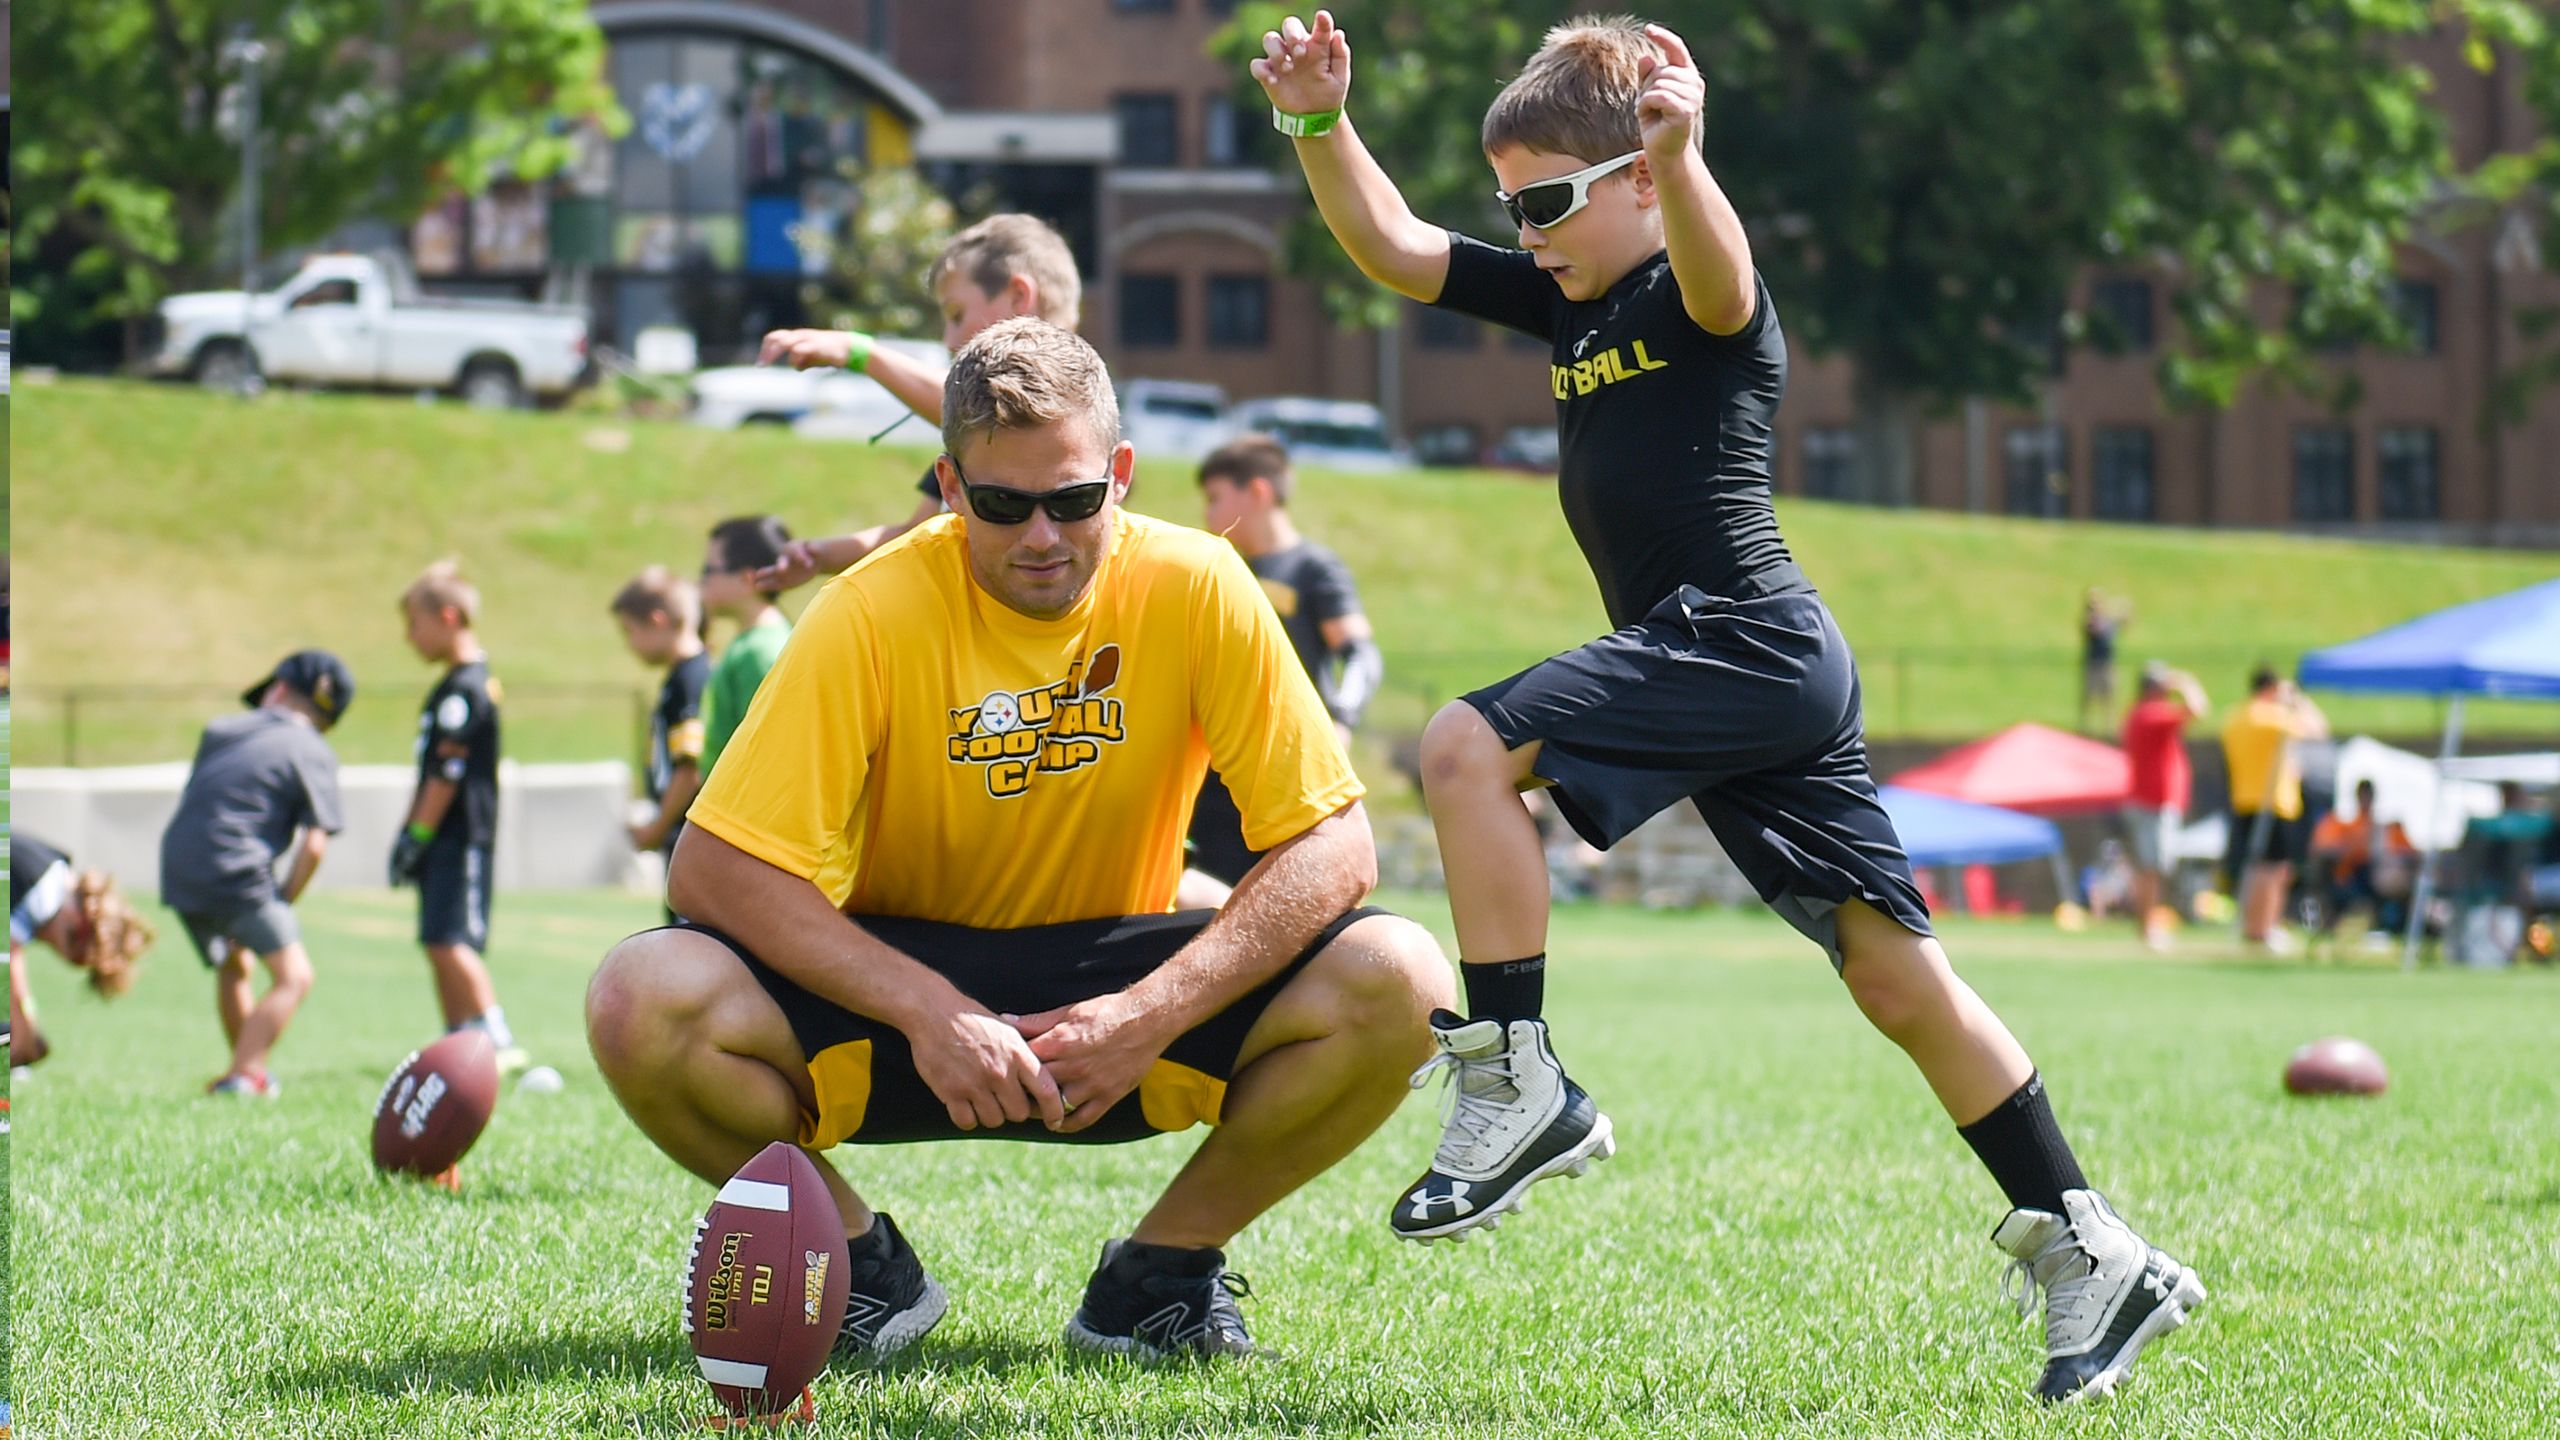 Dynamic Youth Football Workshops: Igniting Passion for the Game